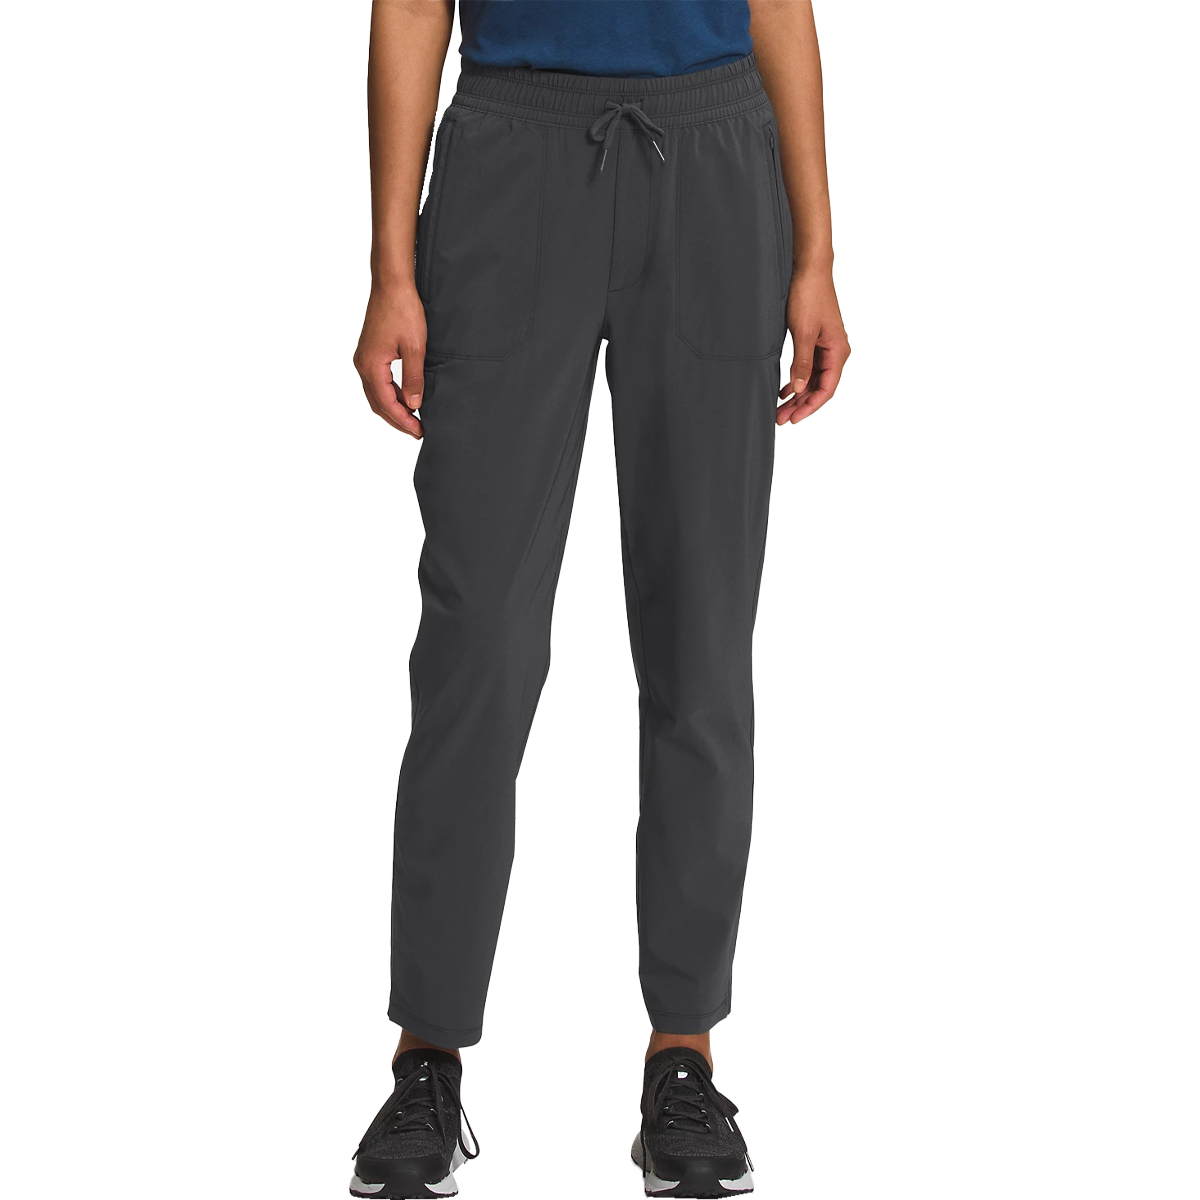 Women's Never Stop Wearing Pant alternate view